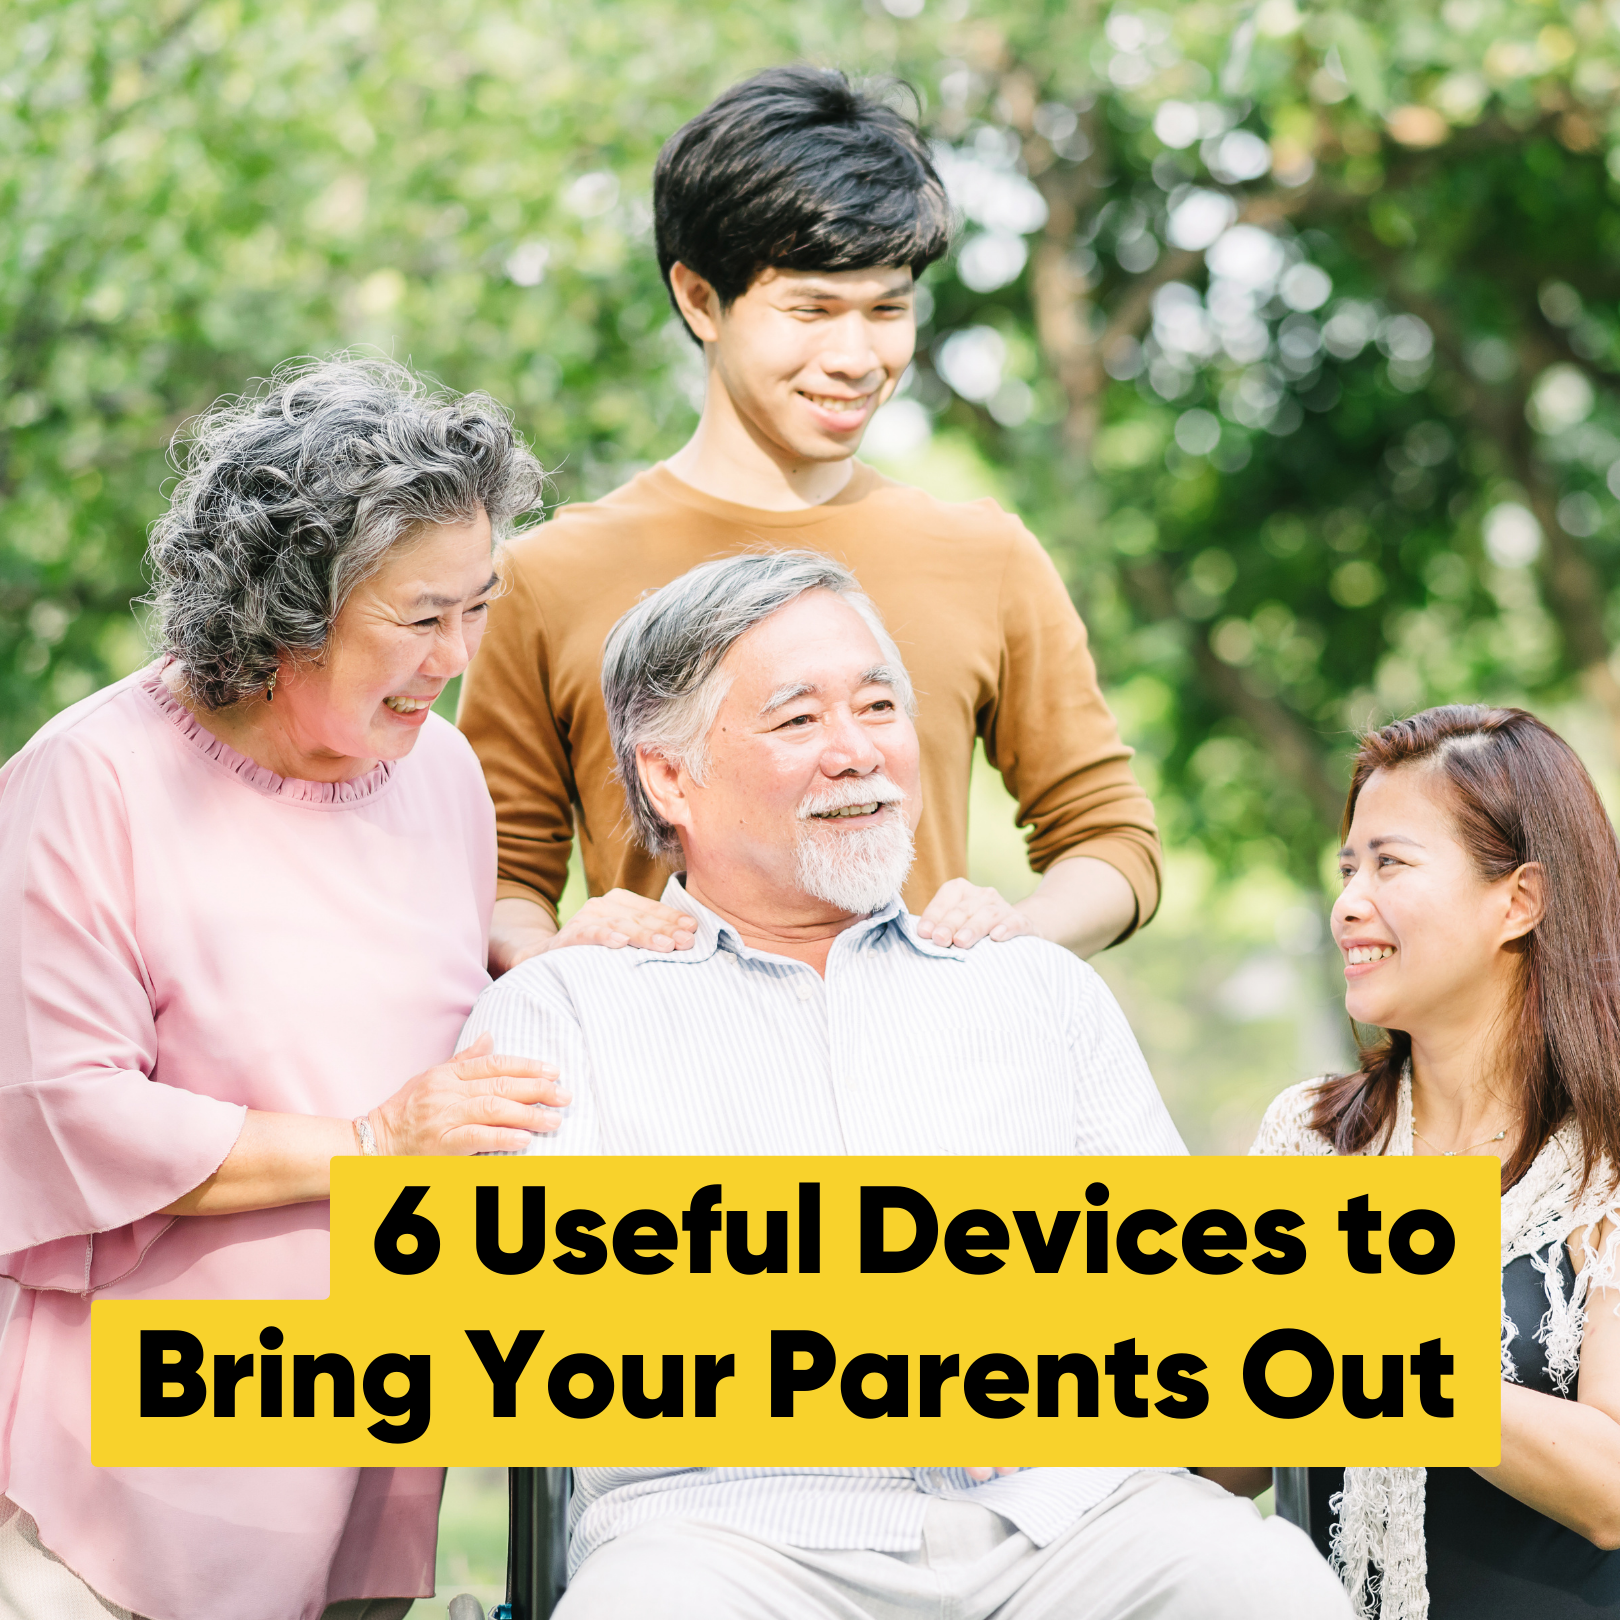 6 Useful Devices to Bring Your Parents Out